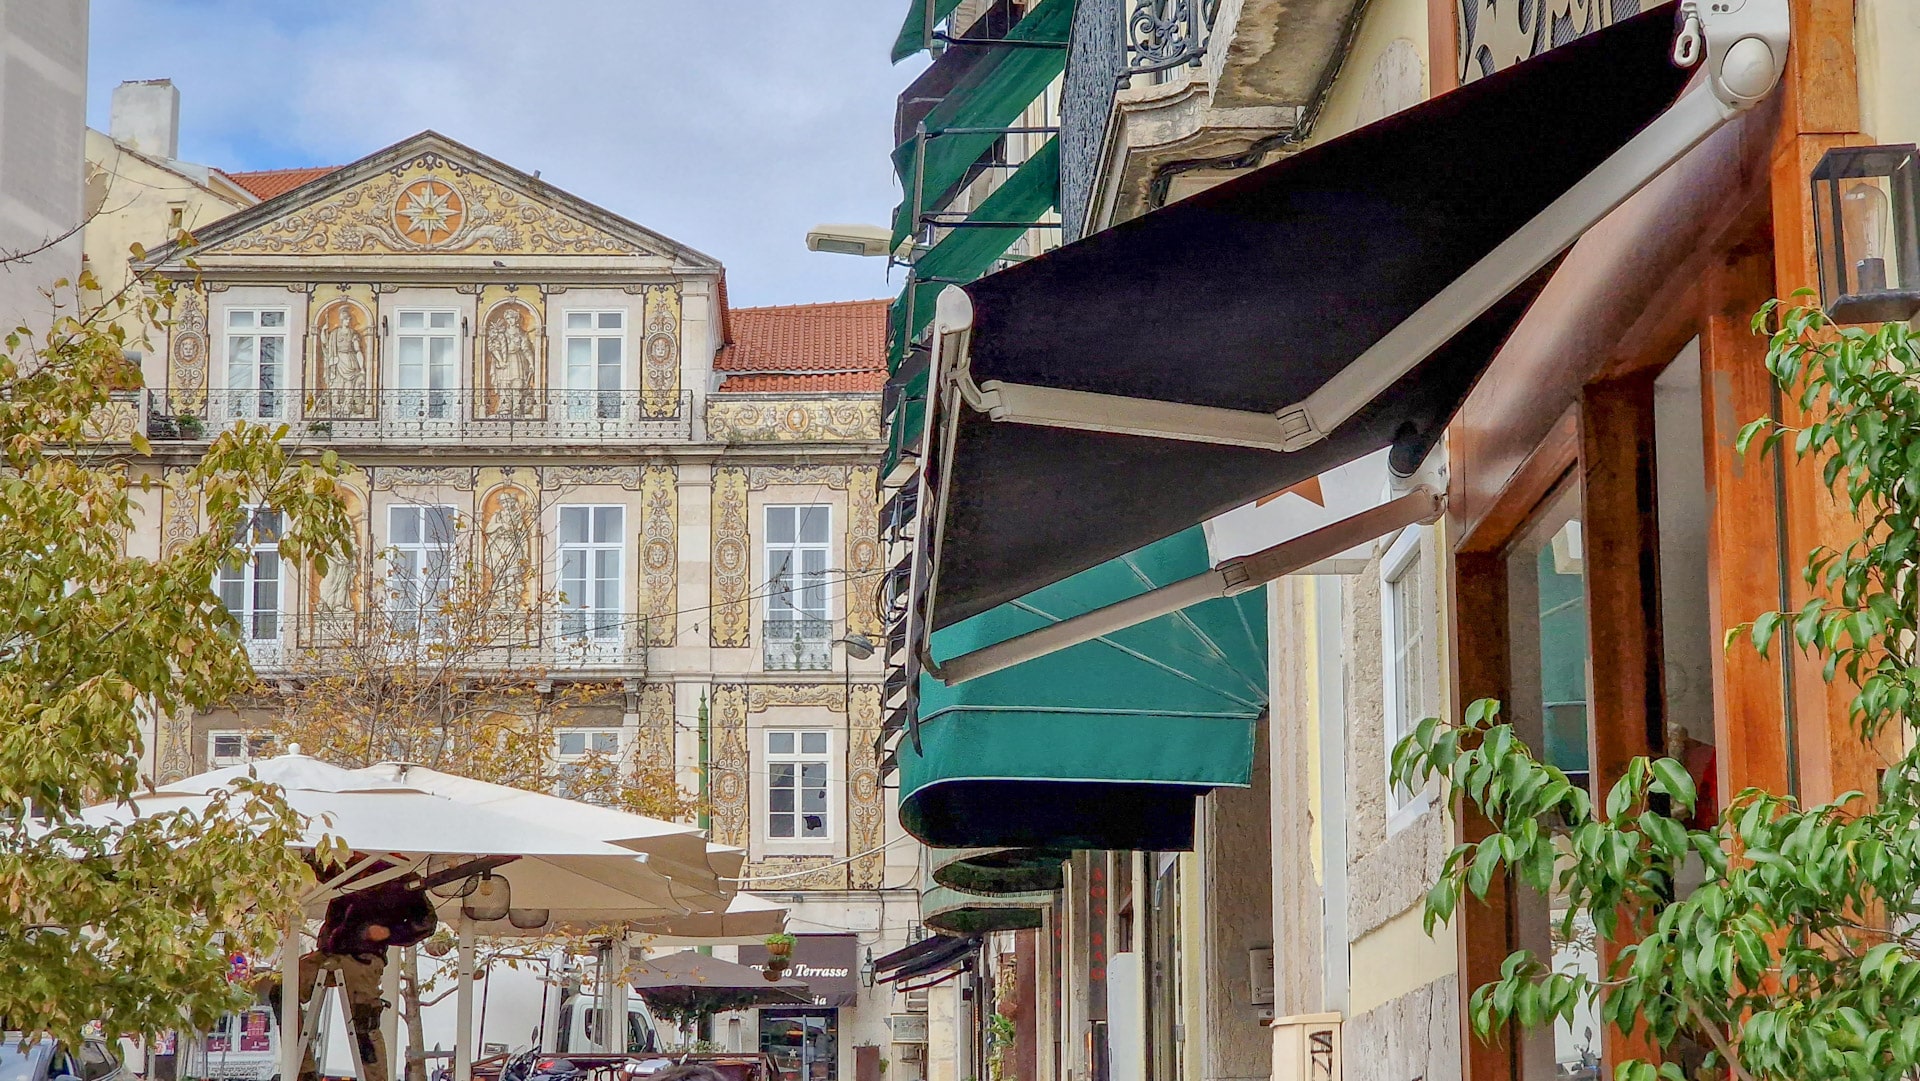 Baixa and Chiado are two famous districts in Lisbon known for their architecture, cafes, shopping, and nightlife